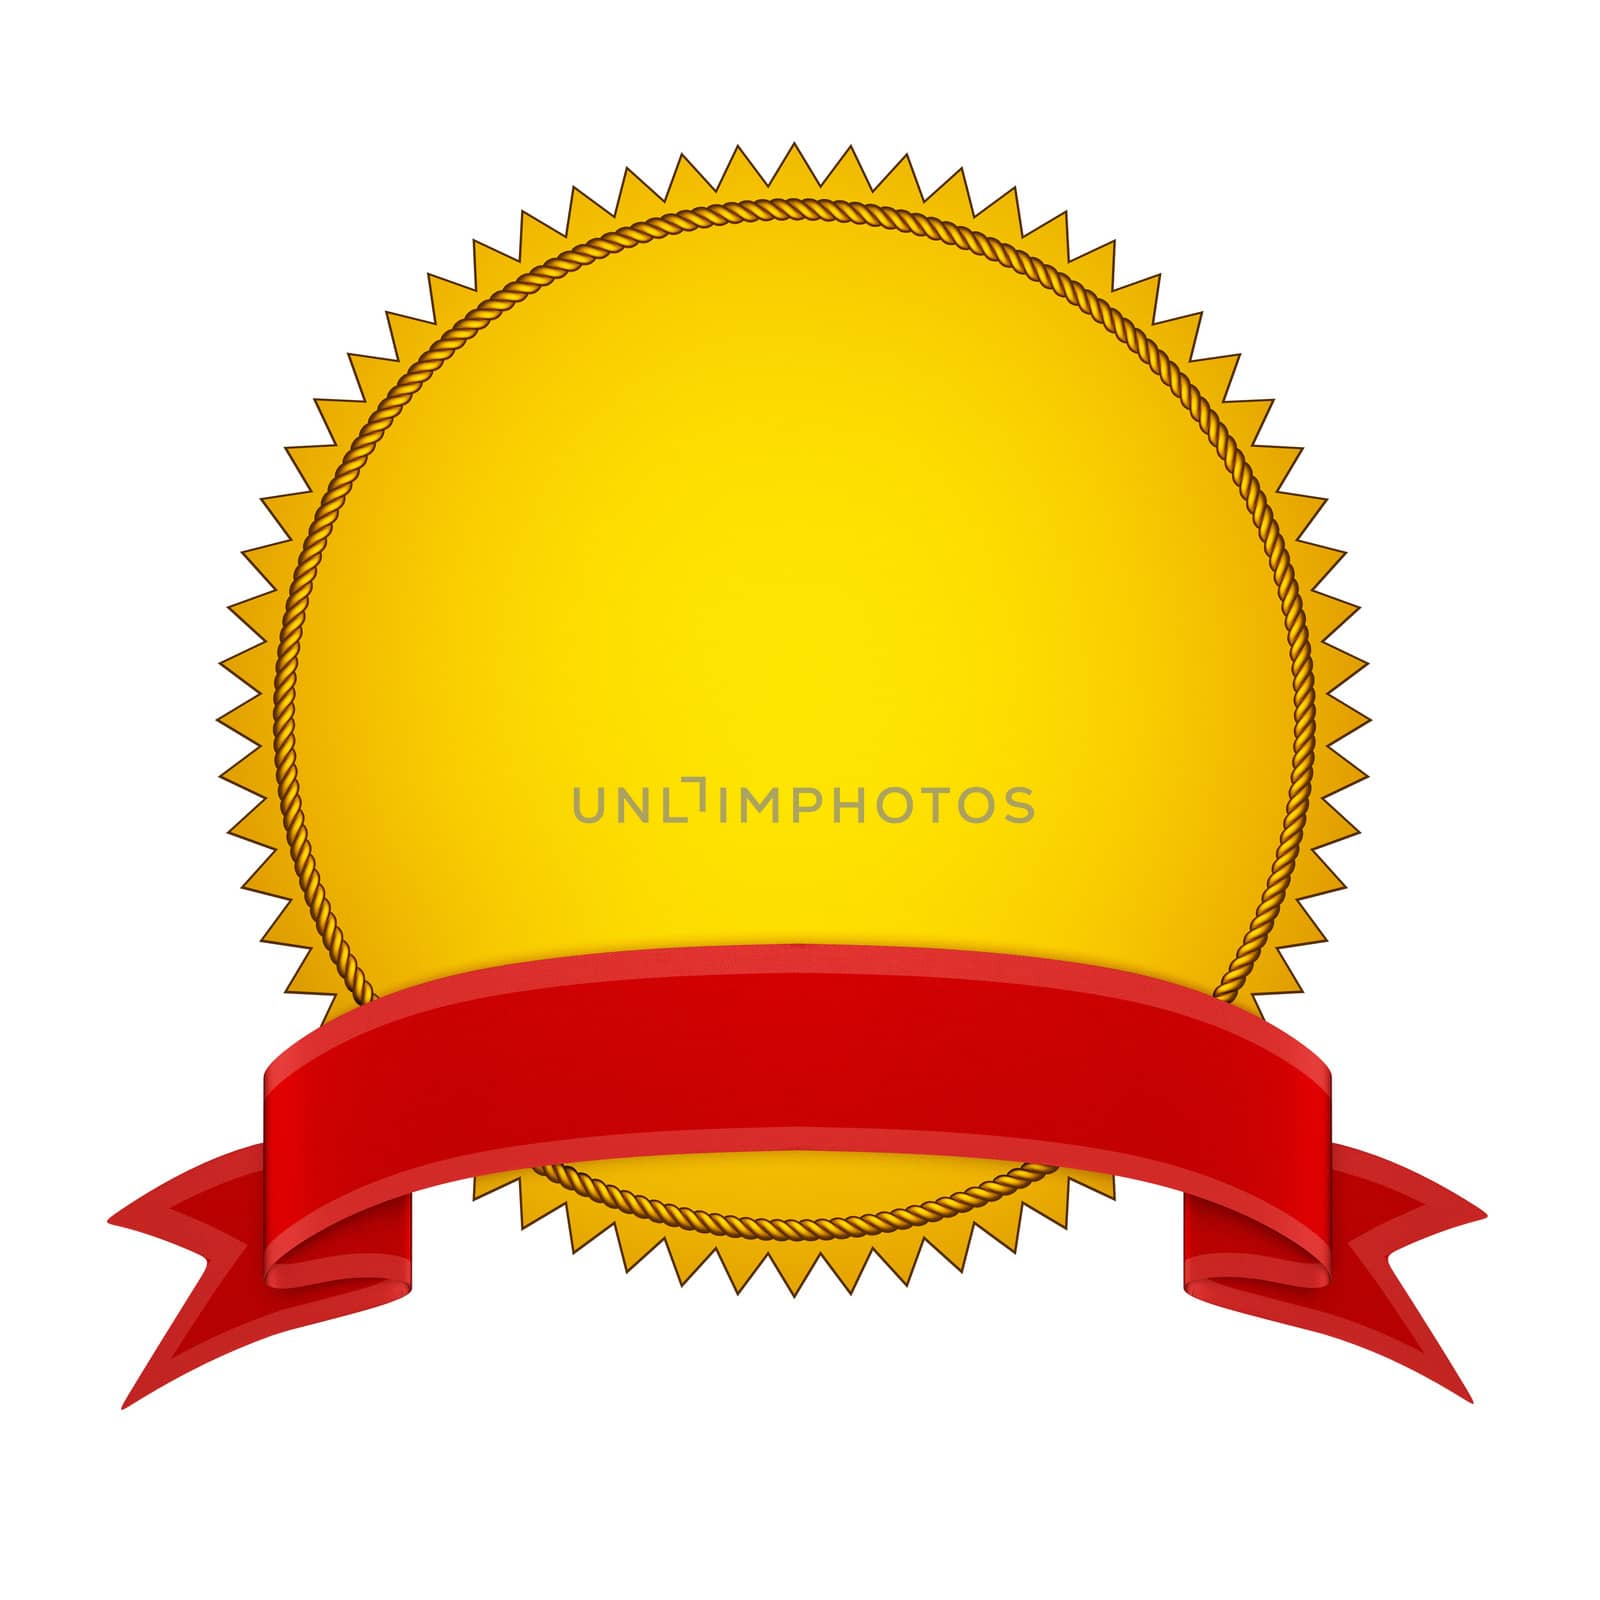 Gold Award Medal with Red Ribbon by ayzek